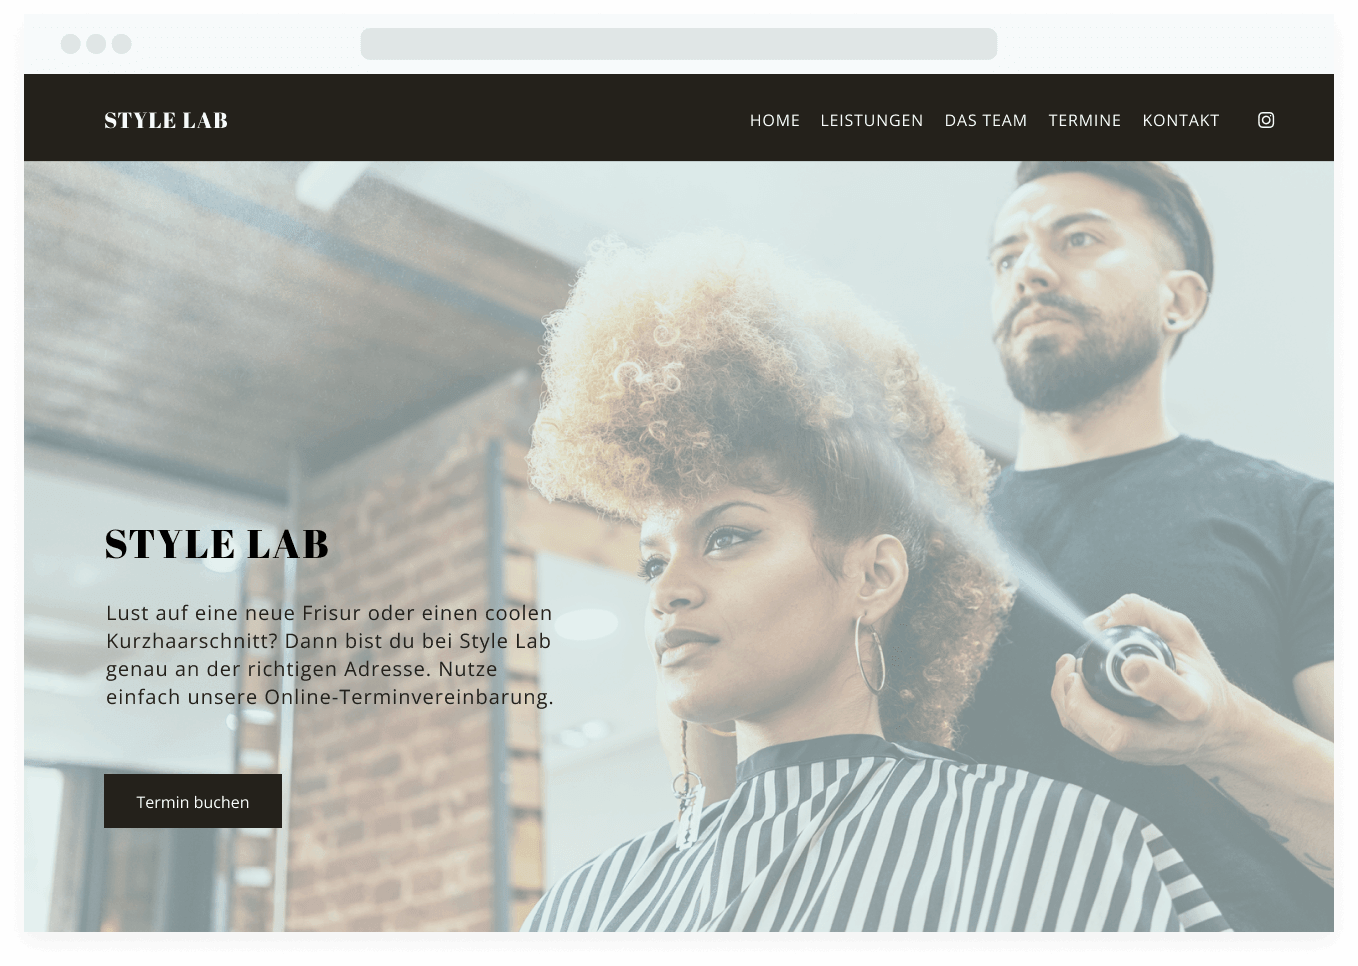 Example of a hairdresser’s website with the online booking tool